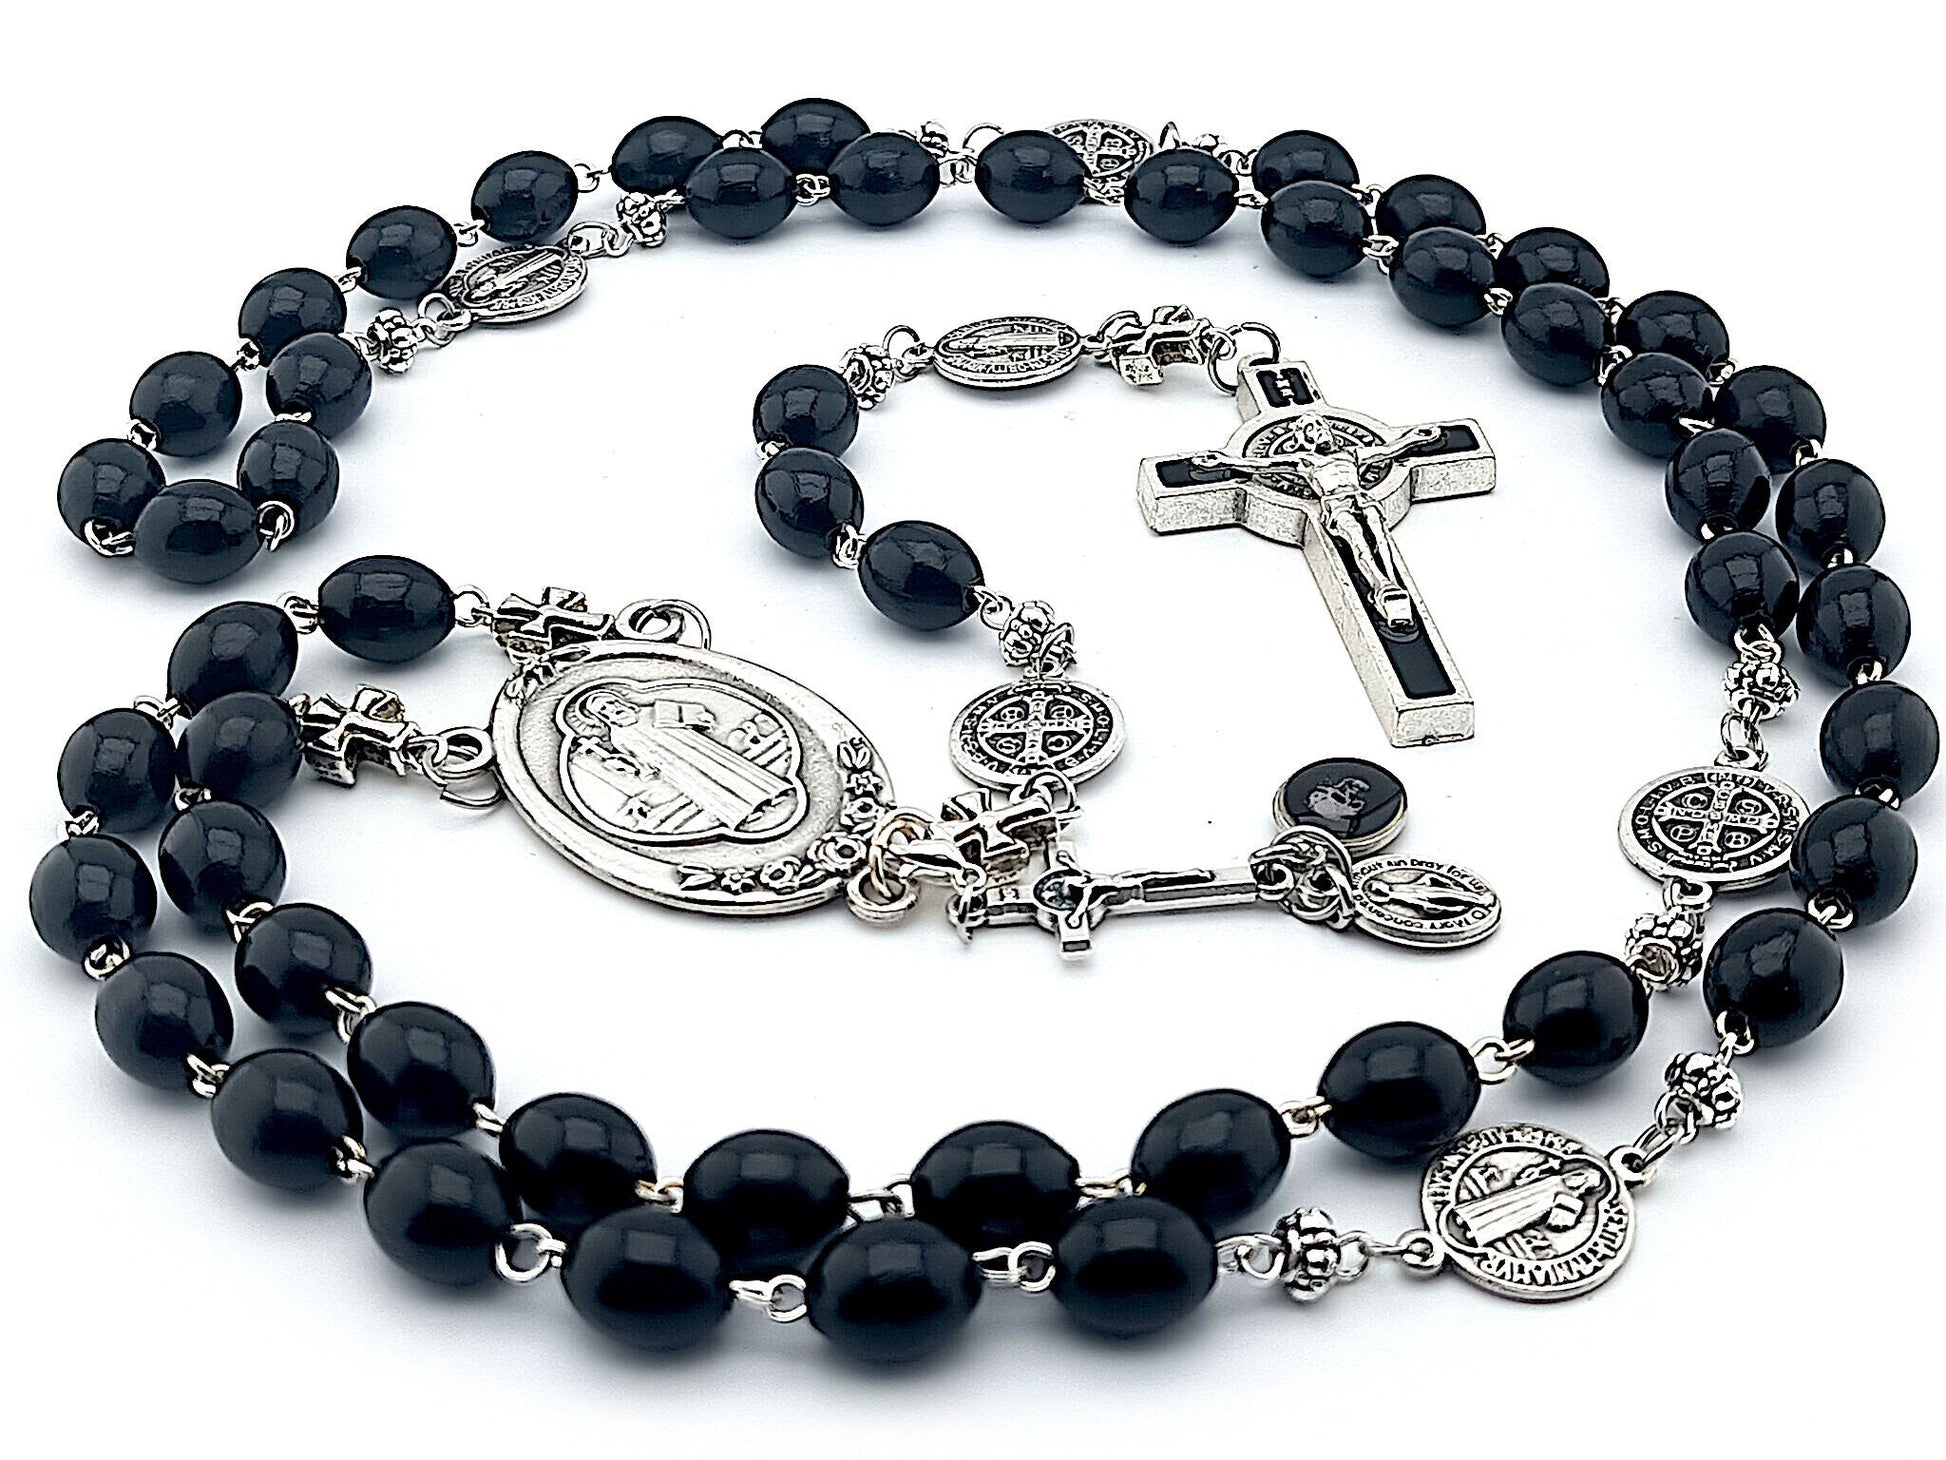 Saint Benedict unique rosary beads with black wooden beads, black and silver enamel Saint Benedict crucifix and centre medal.